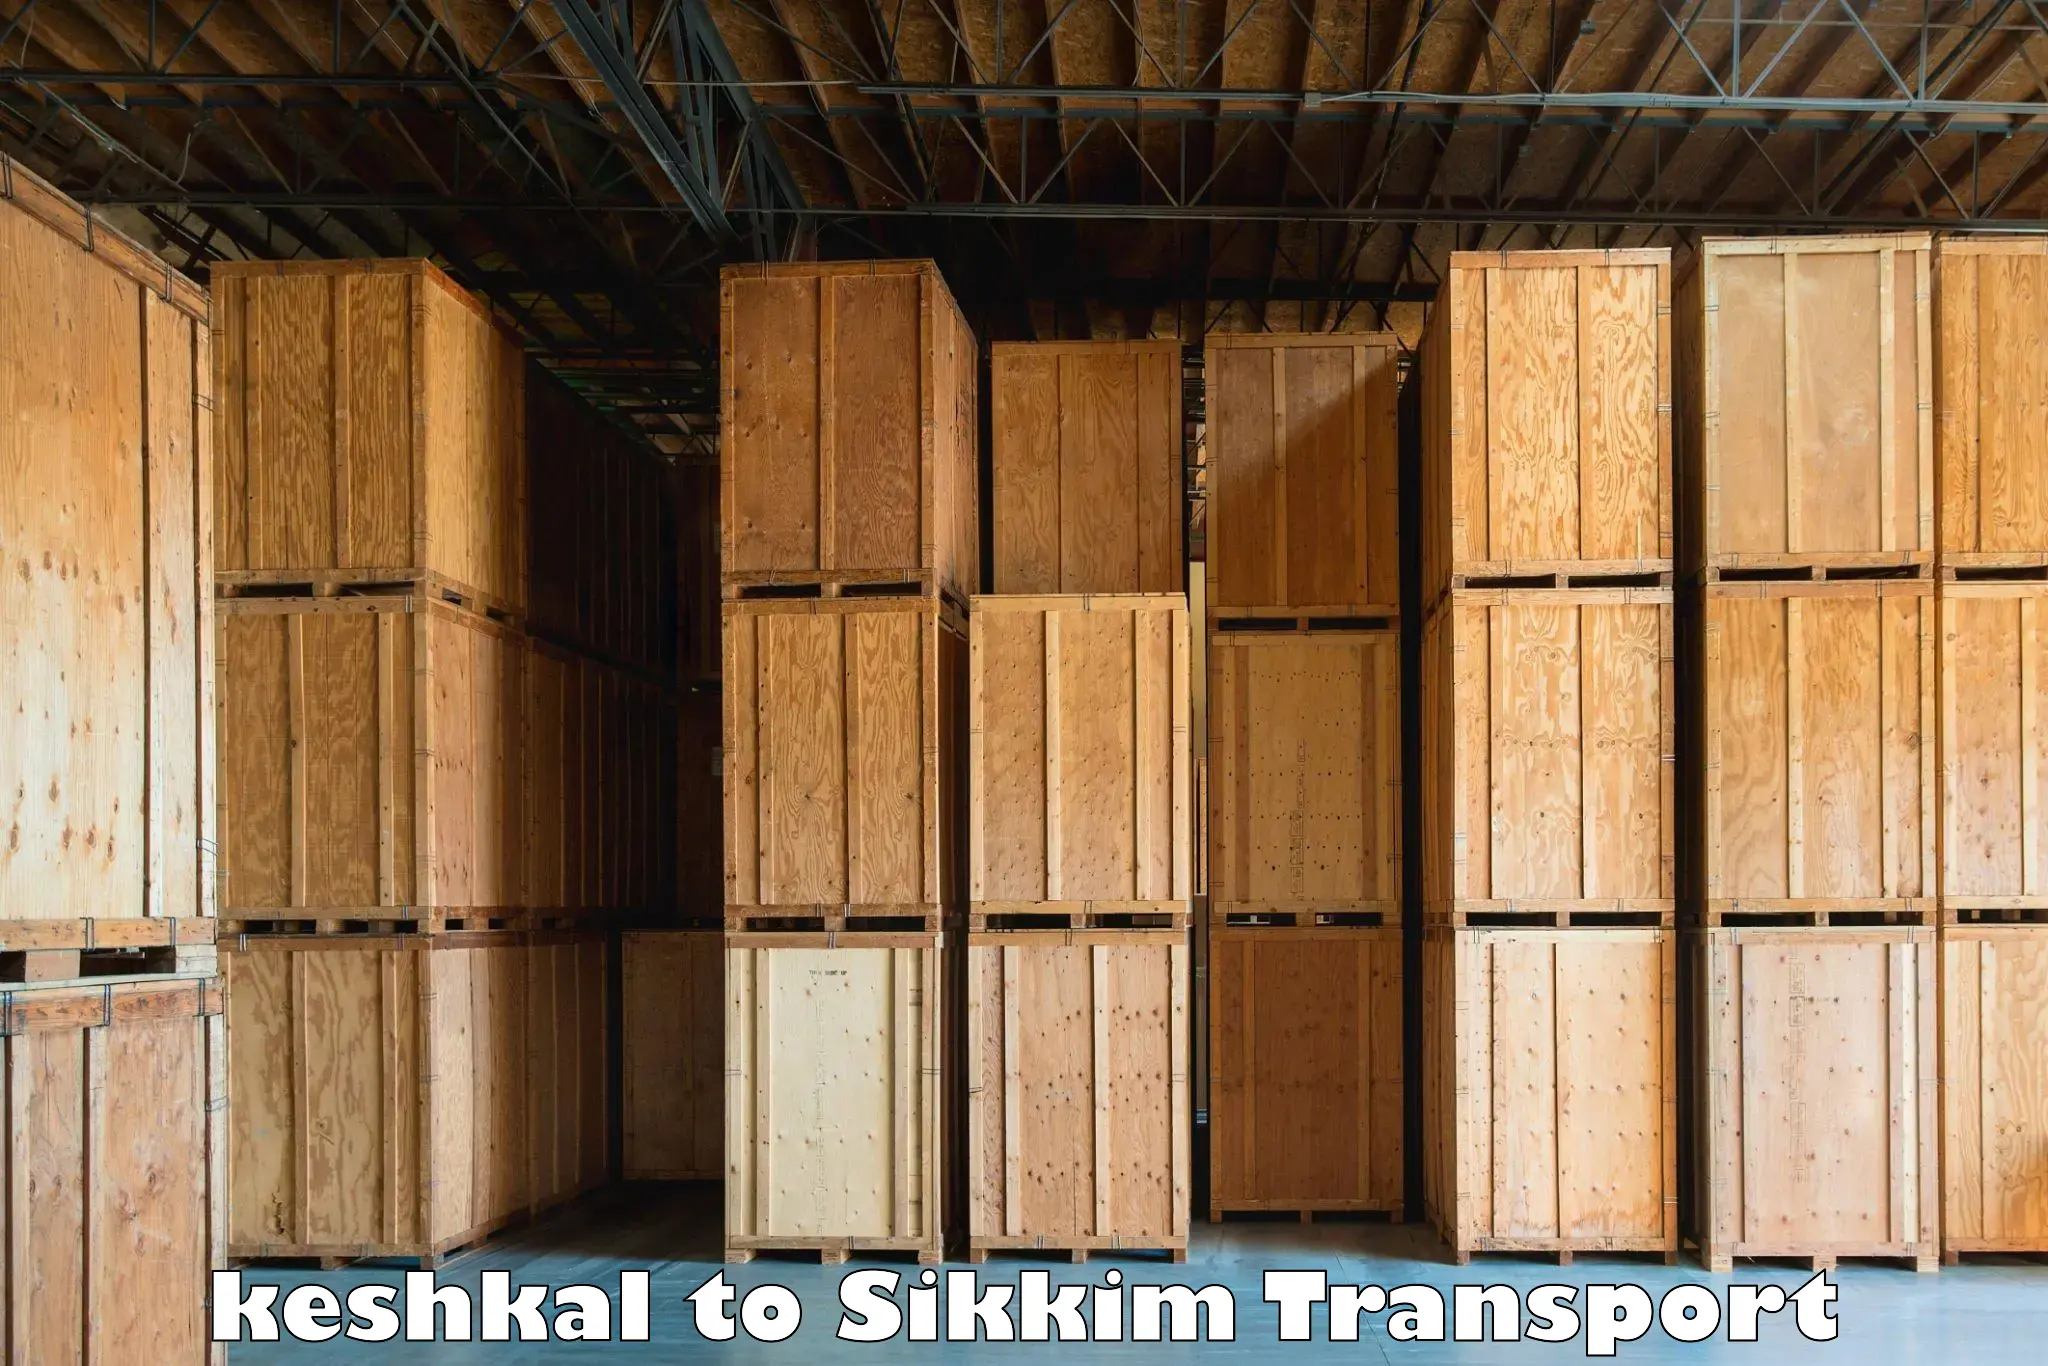 Transport shared services keshkal to Pelling